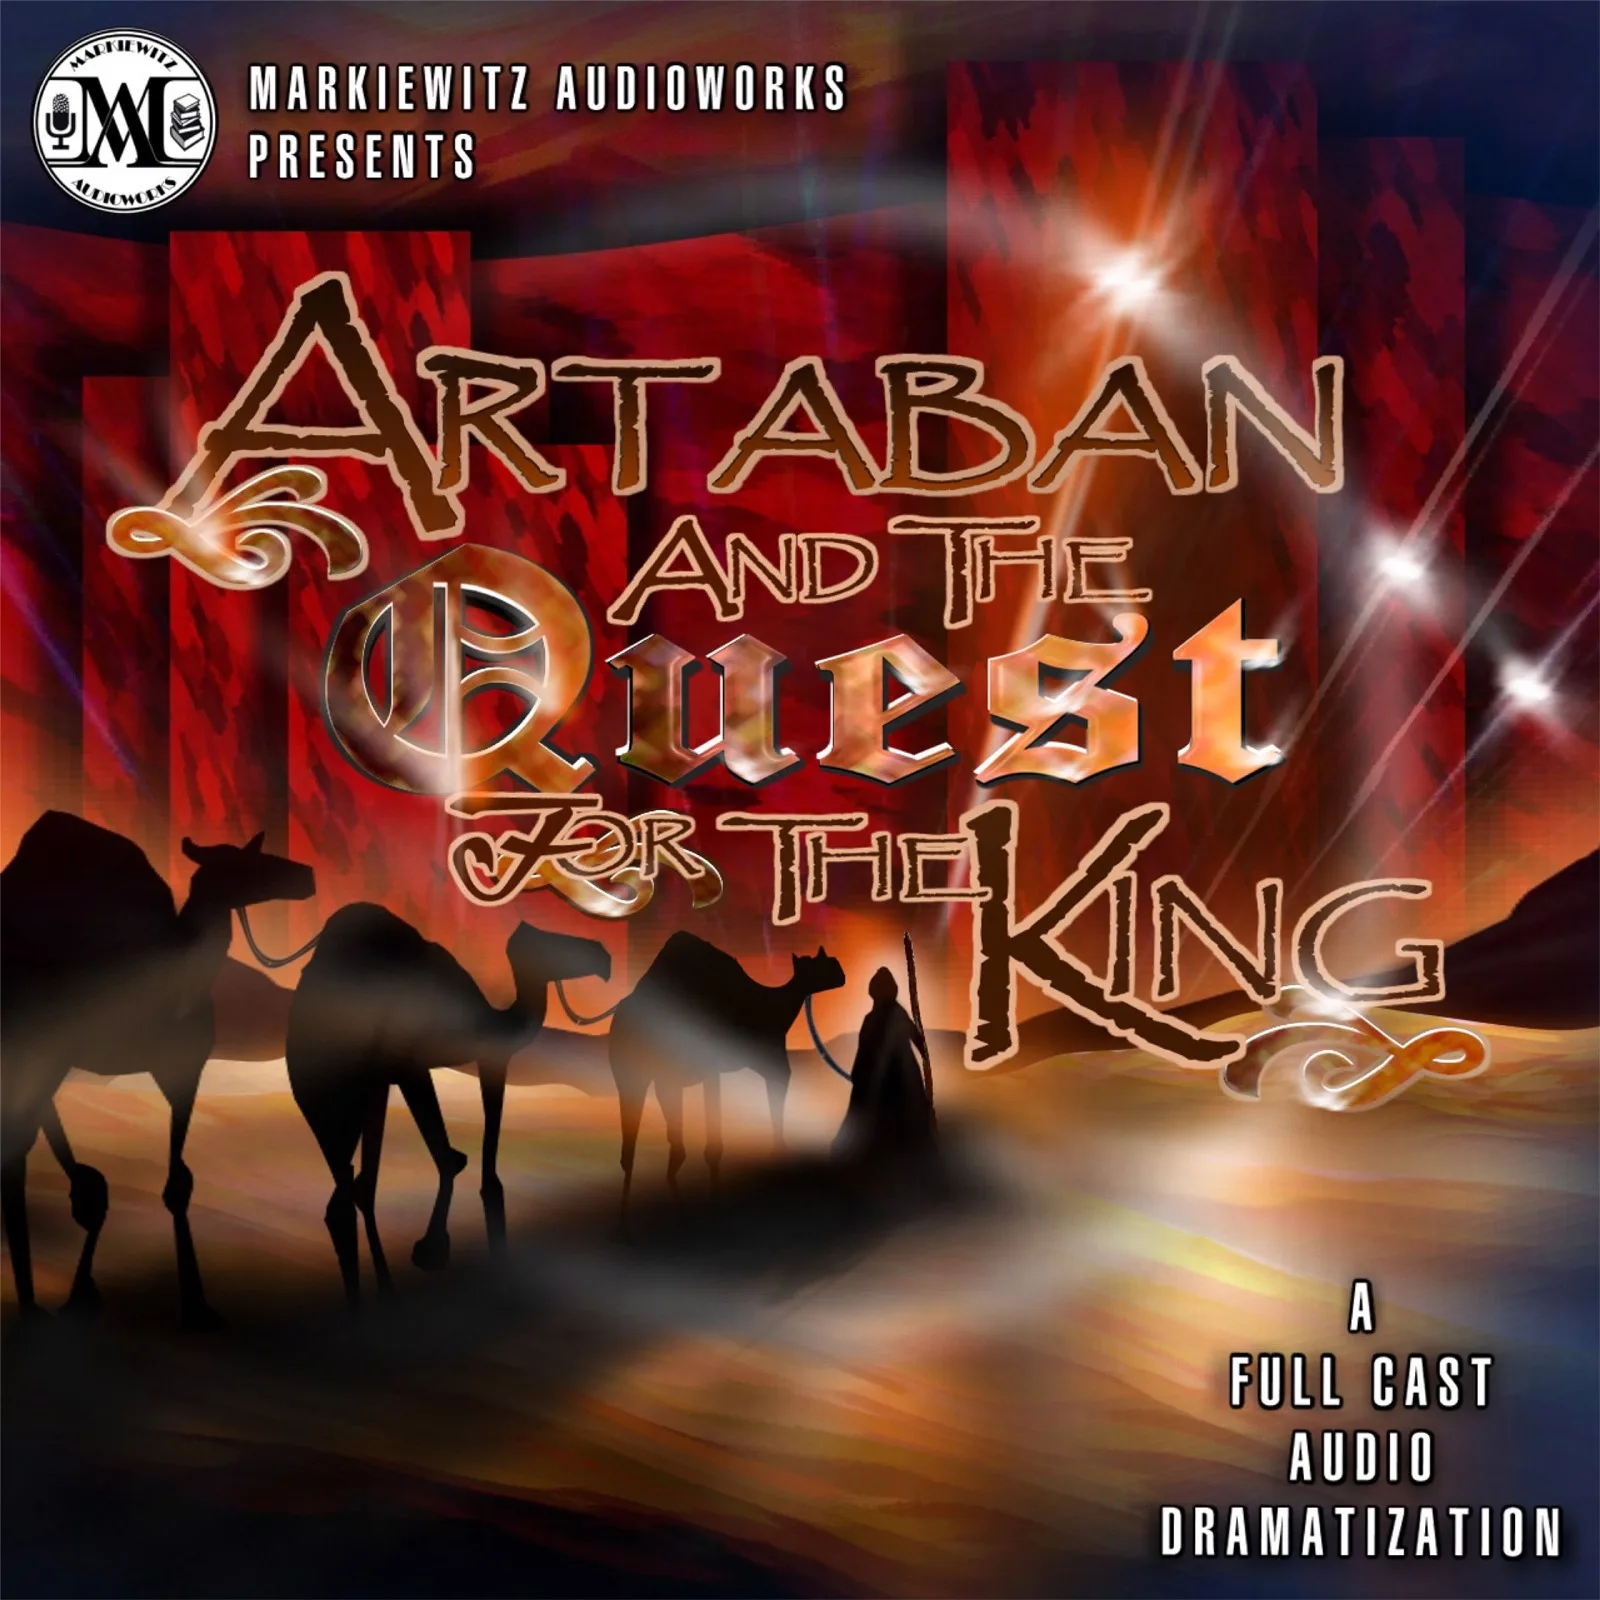 Artaban and the Quest for the King is based upon the 1895 novella 